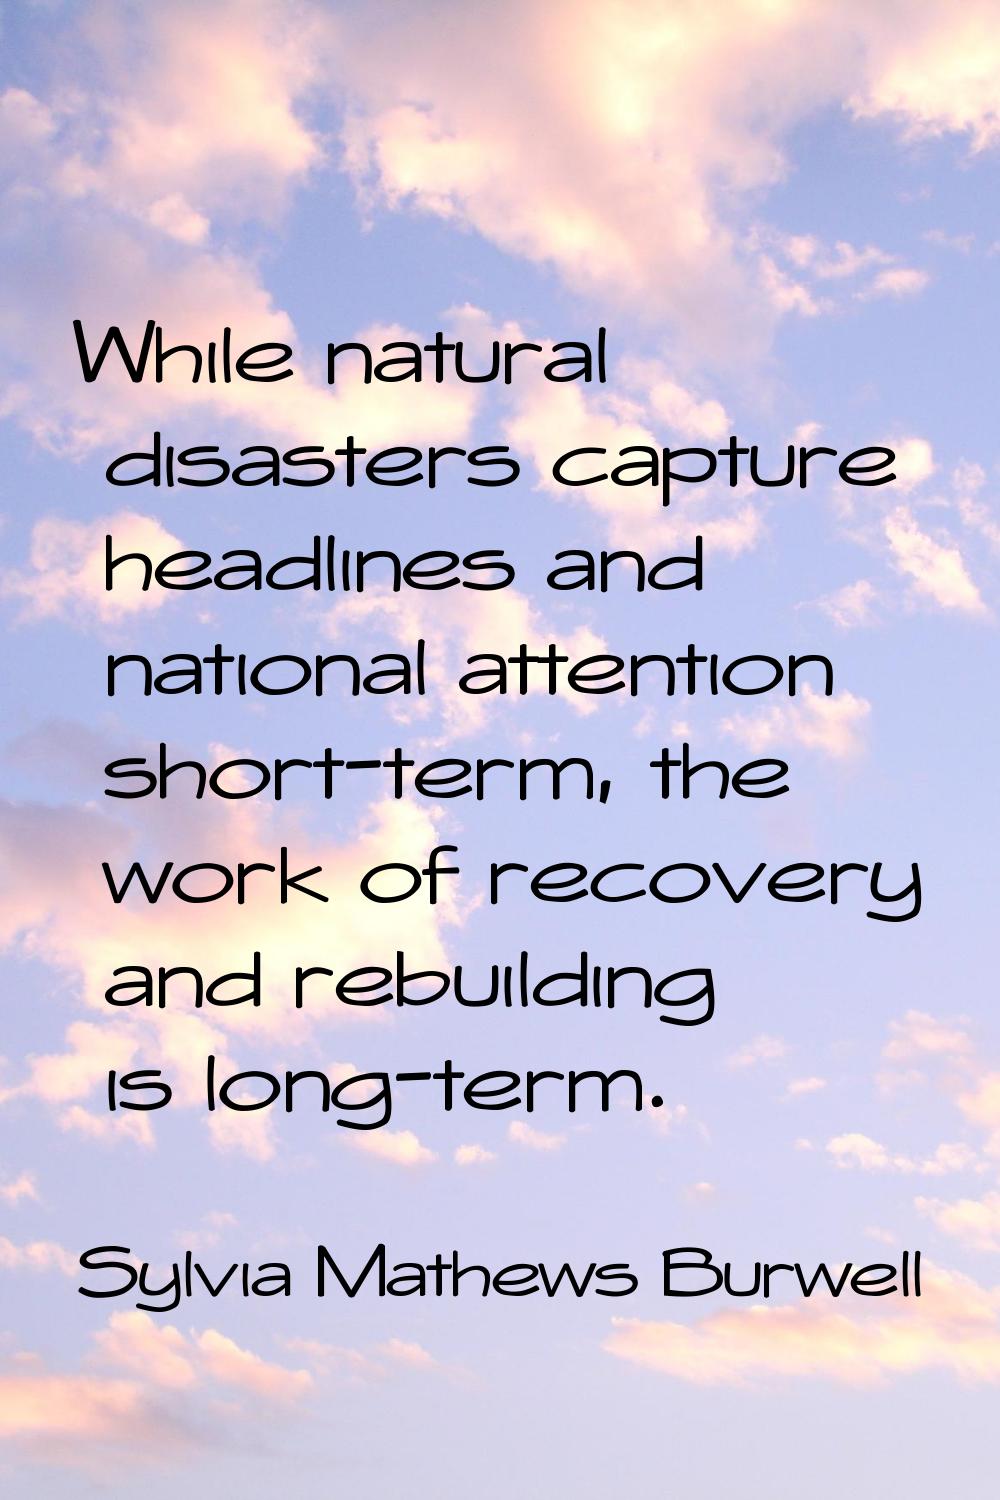 While natural disasters capture headlines and national attention short-term, the work of recovery a